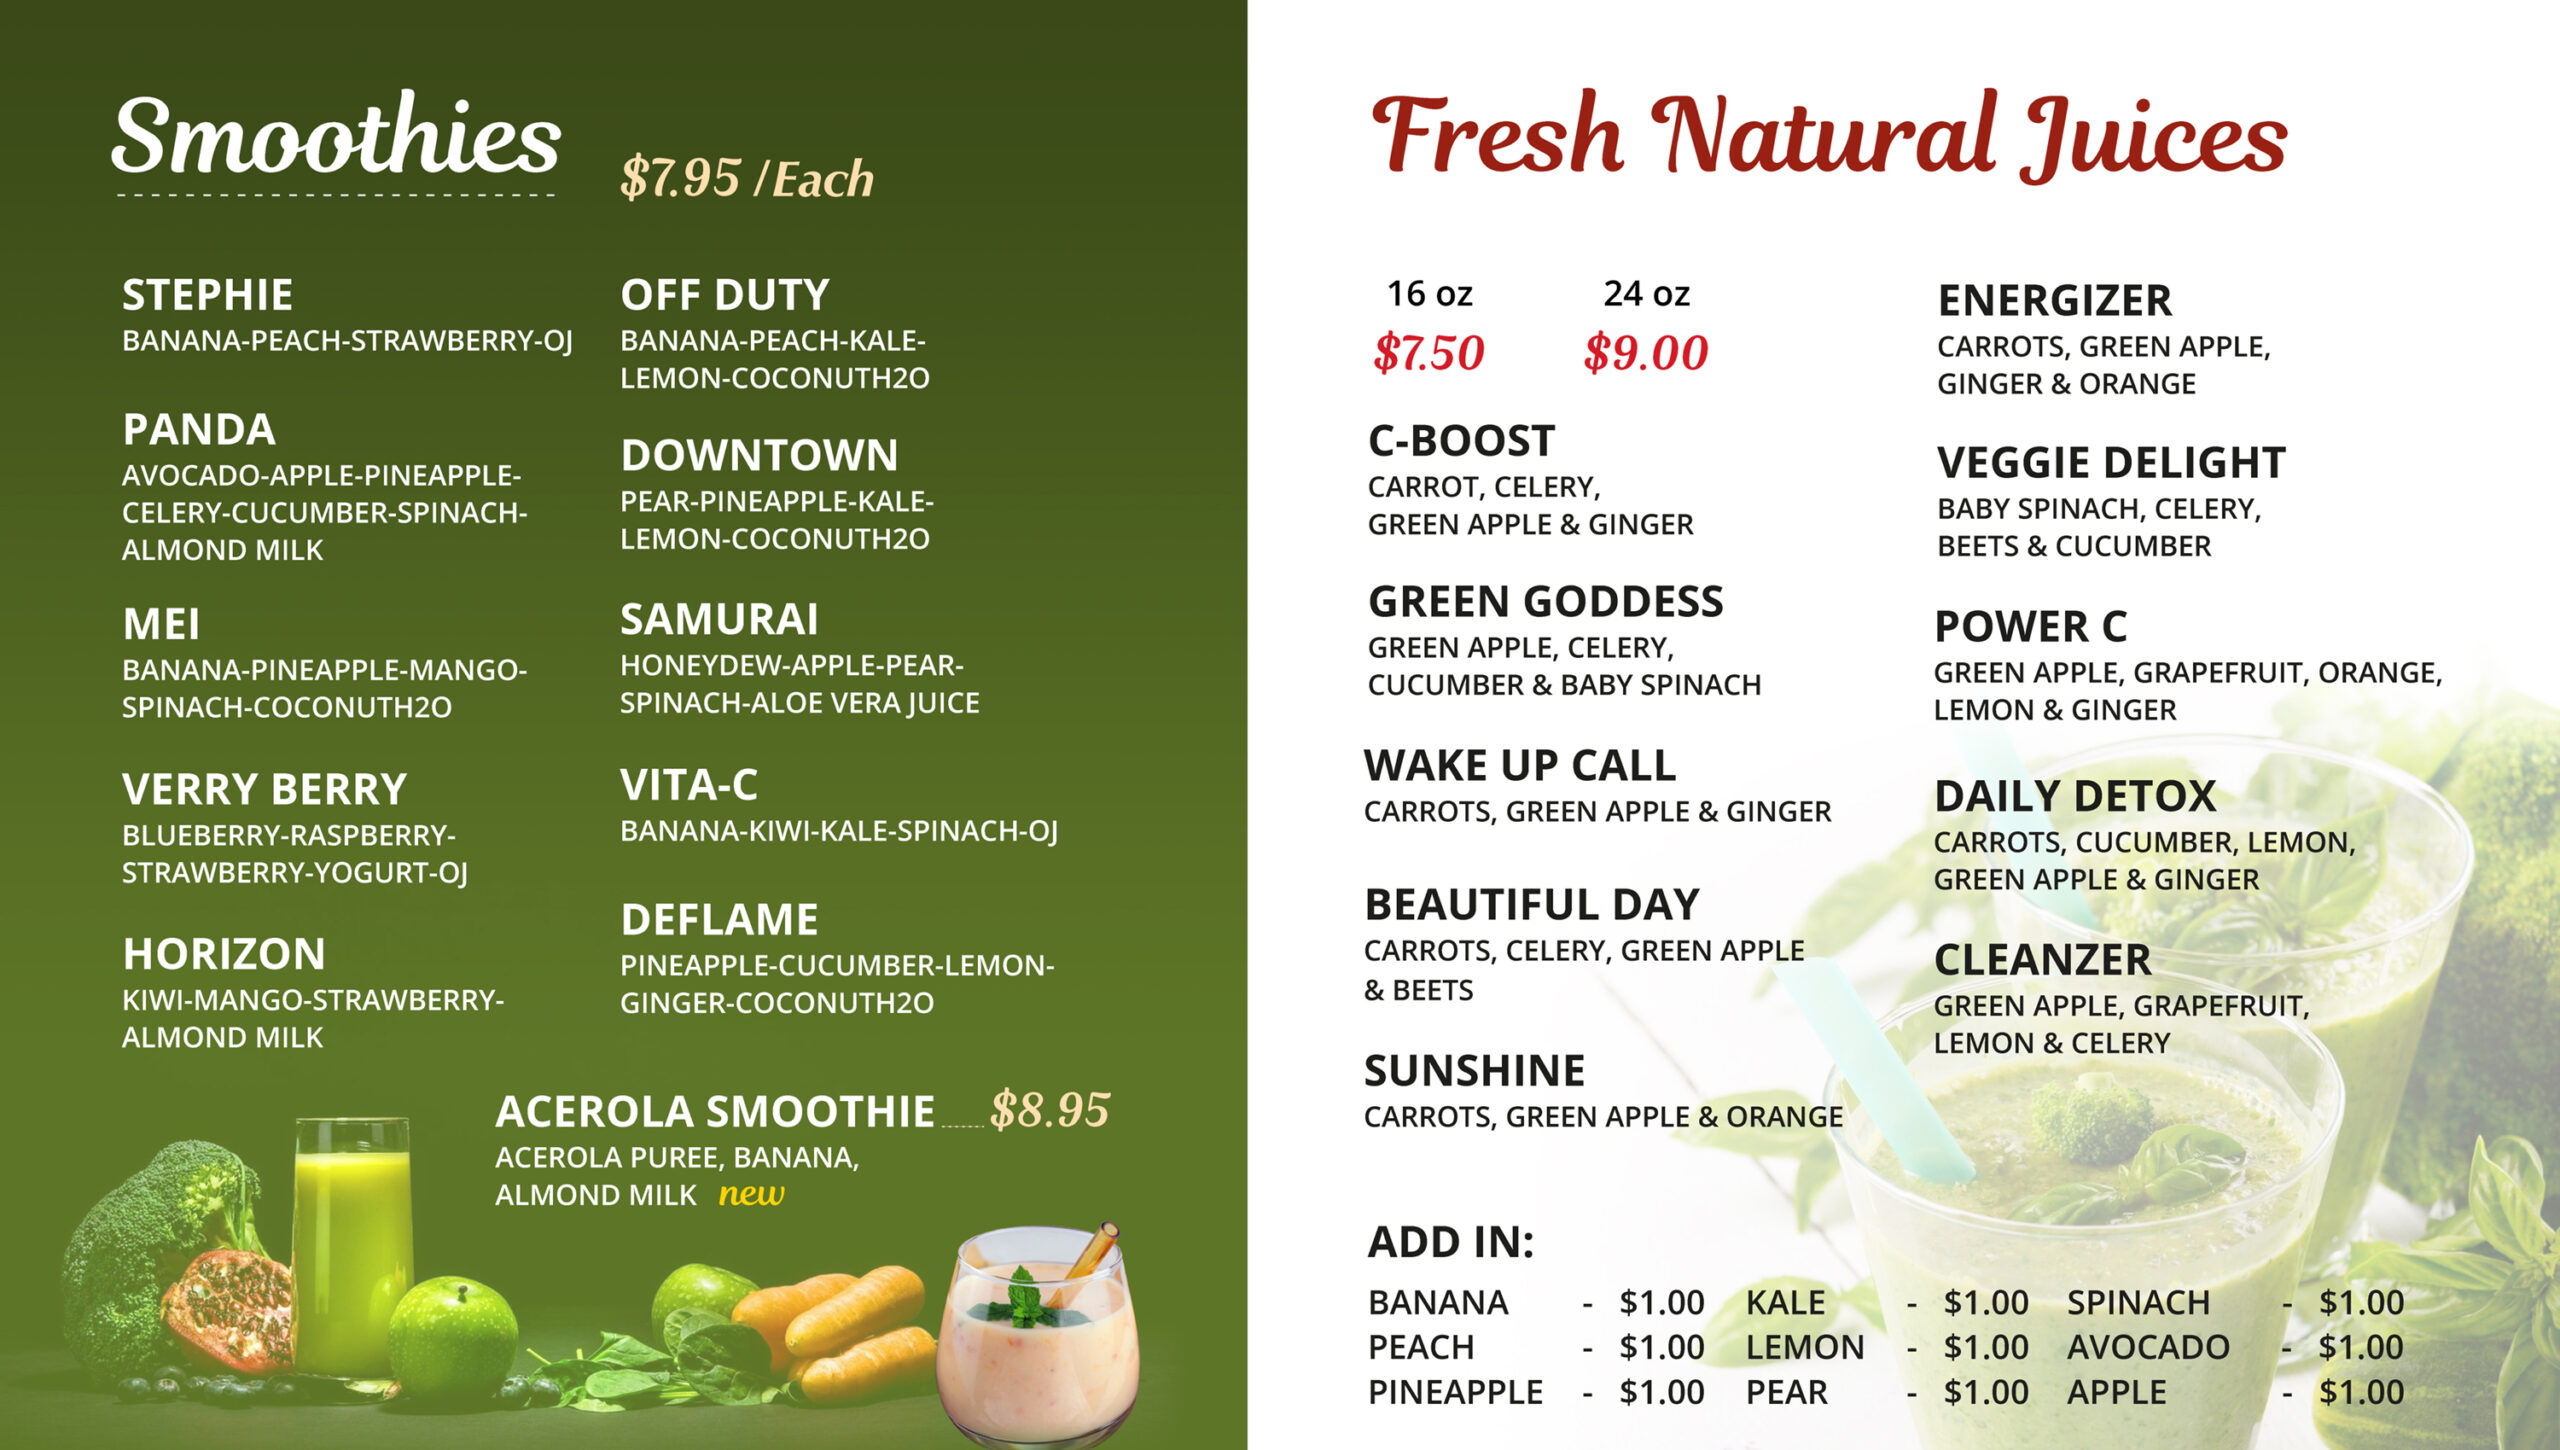 Smoothies and Fresh Natural Juices